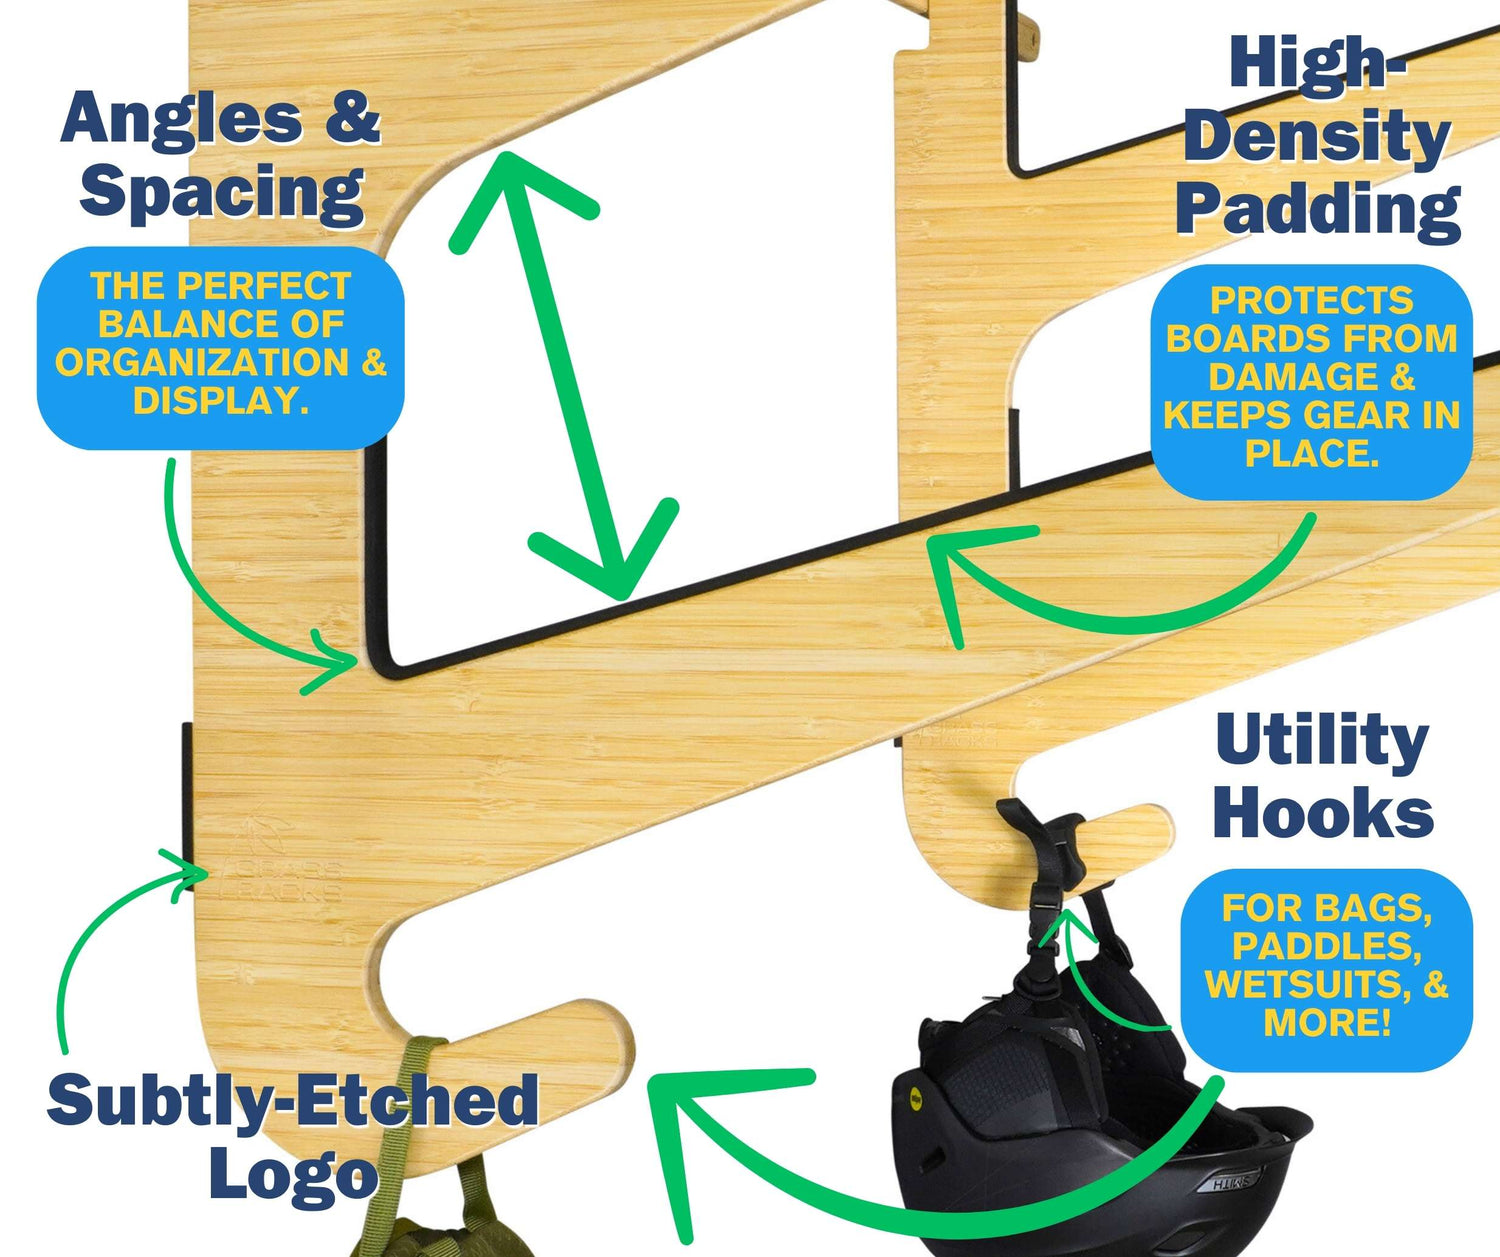 Paddle Board Wall Mount Features